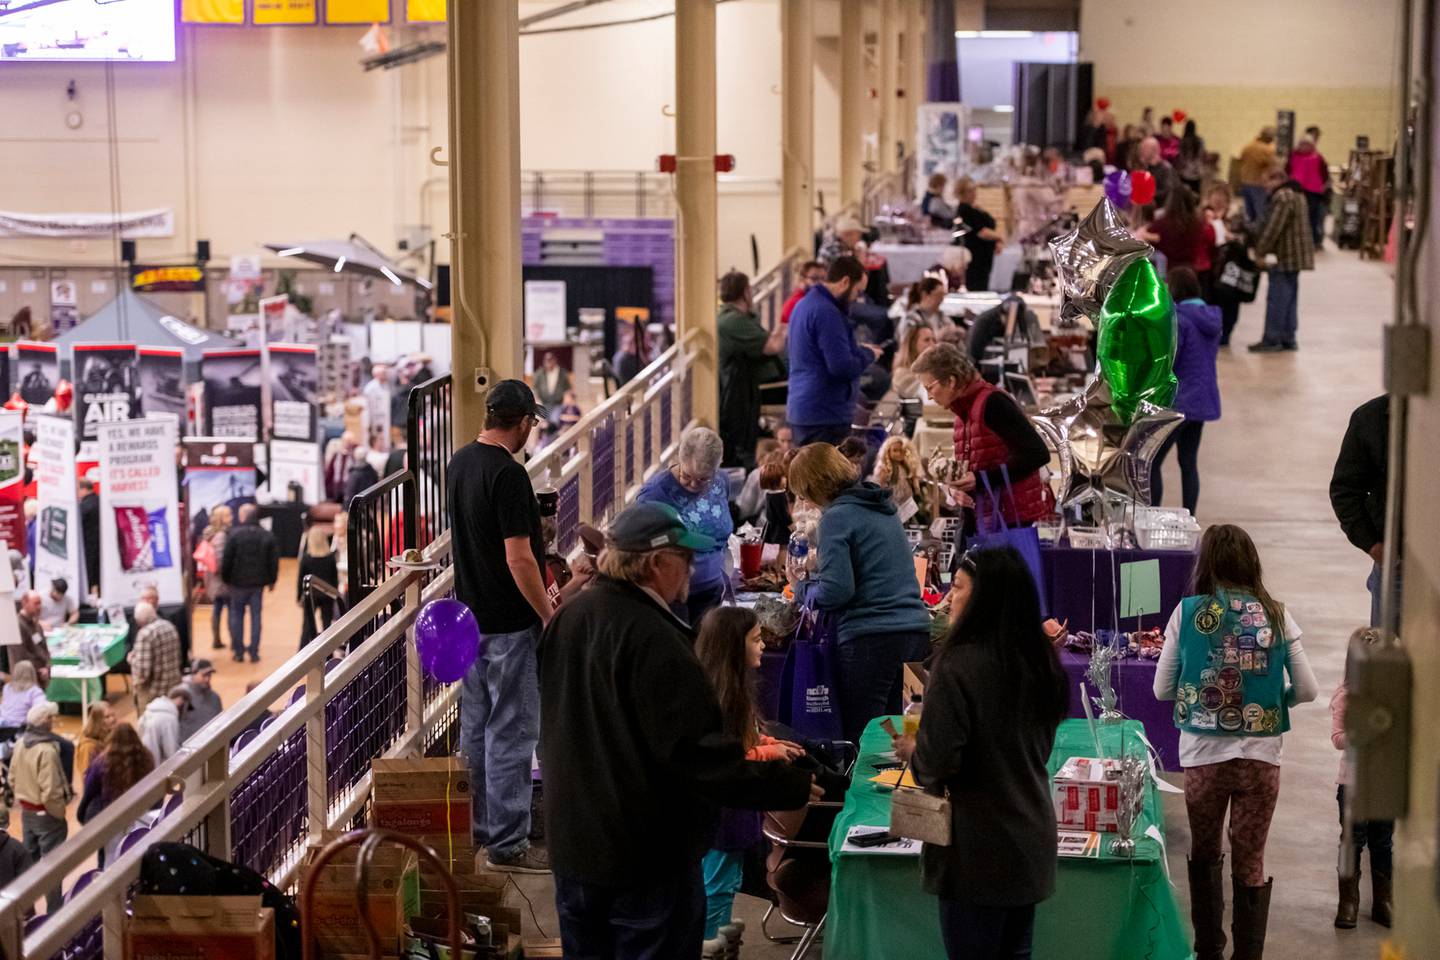 Ag Mech Club adviser Jana Knupp says the Farm Expo offers Western Illinois University students a prime opportunity to introduce themselves to and network with potential employers in the agriculture industry.